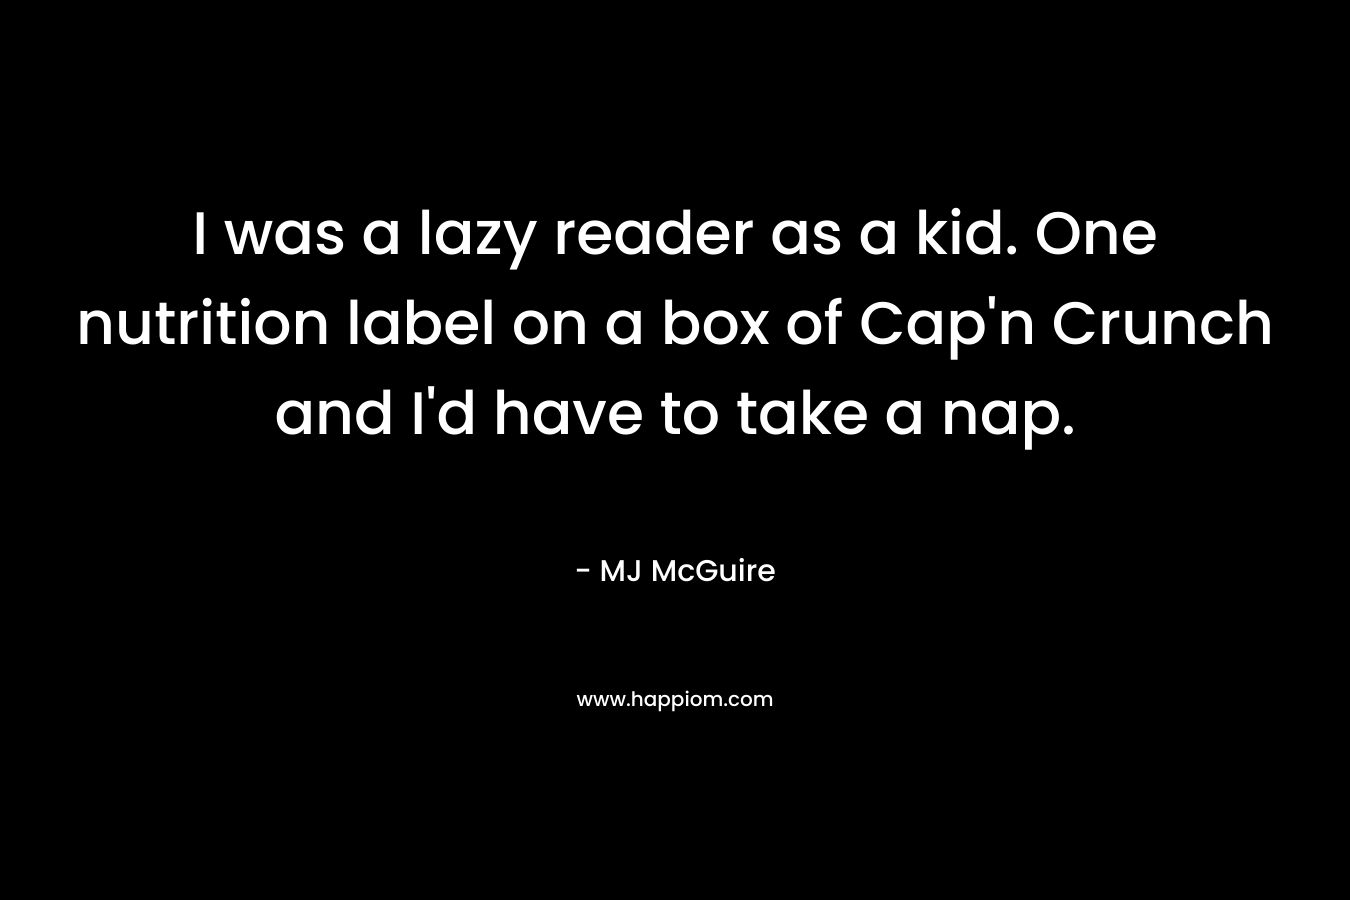 I was a lazy reader as a kid. One nutrition label on a box of Cap’n Crunch and I’d have to take a nap. – MJ McGuire